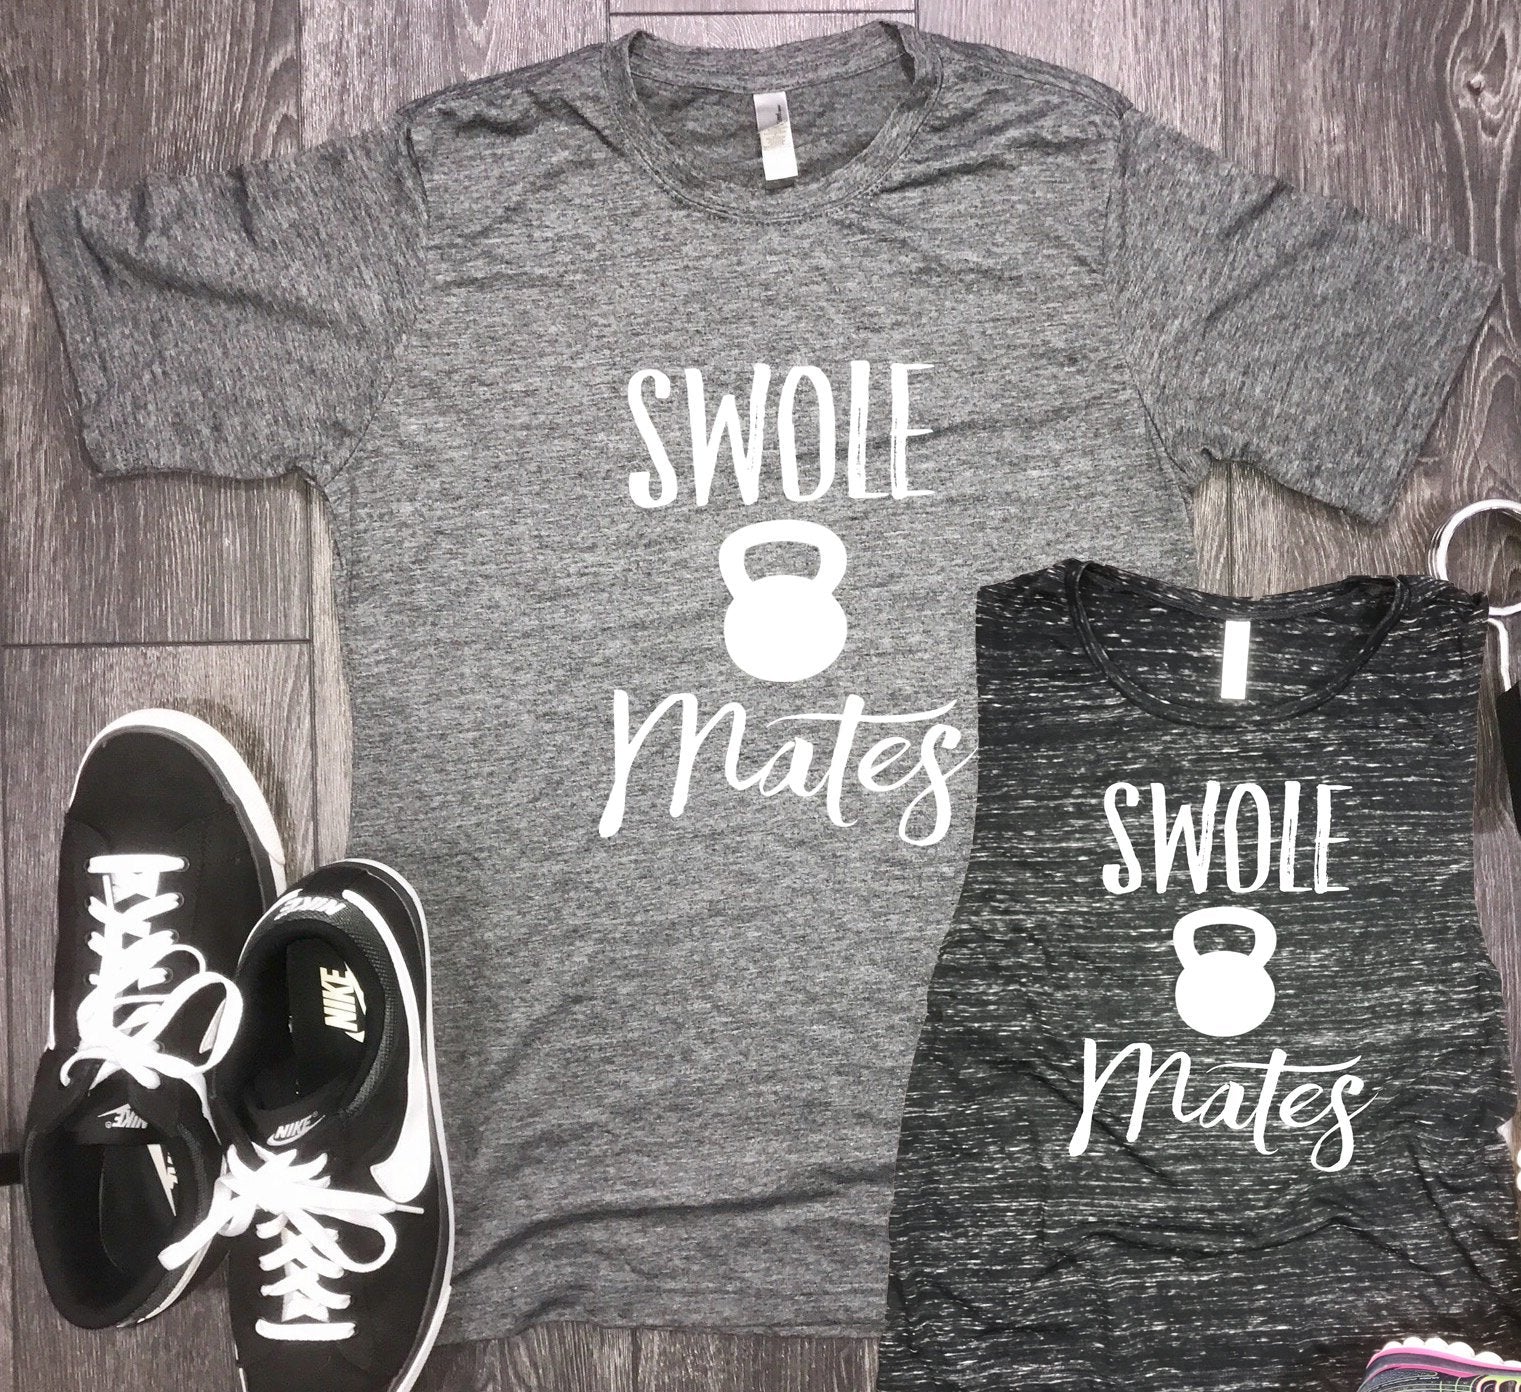 couples shirts, couples workout shirts, funny couples shirts, workout -  Living Limitless Clothing Co.